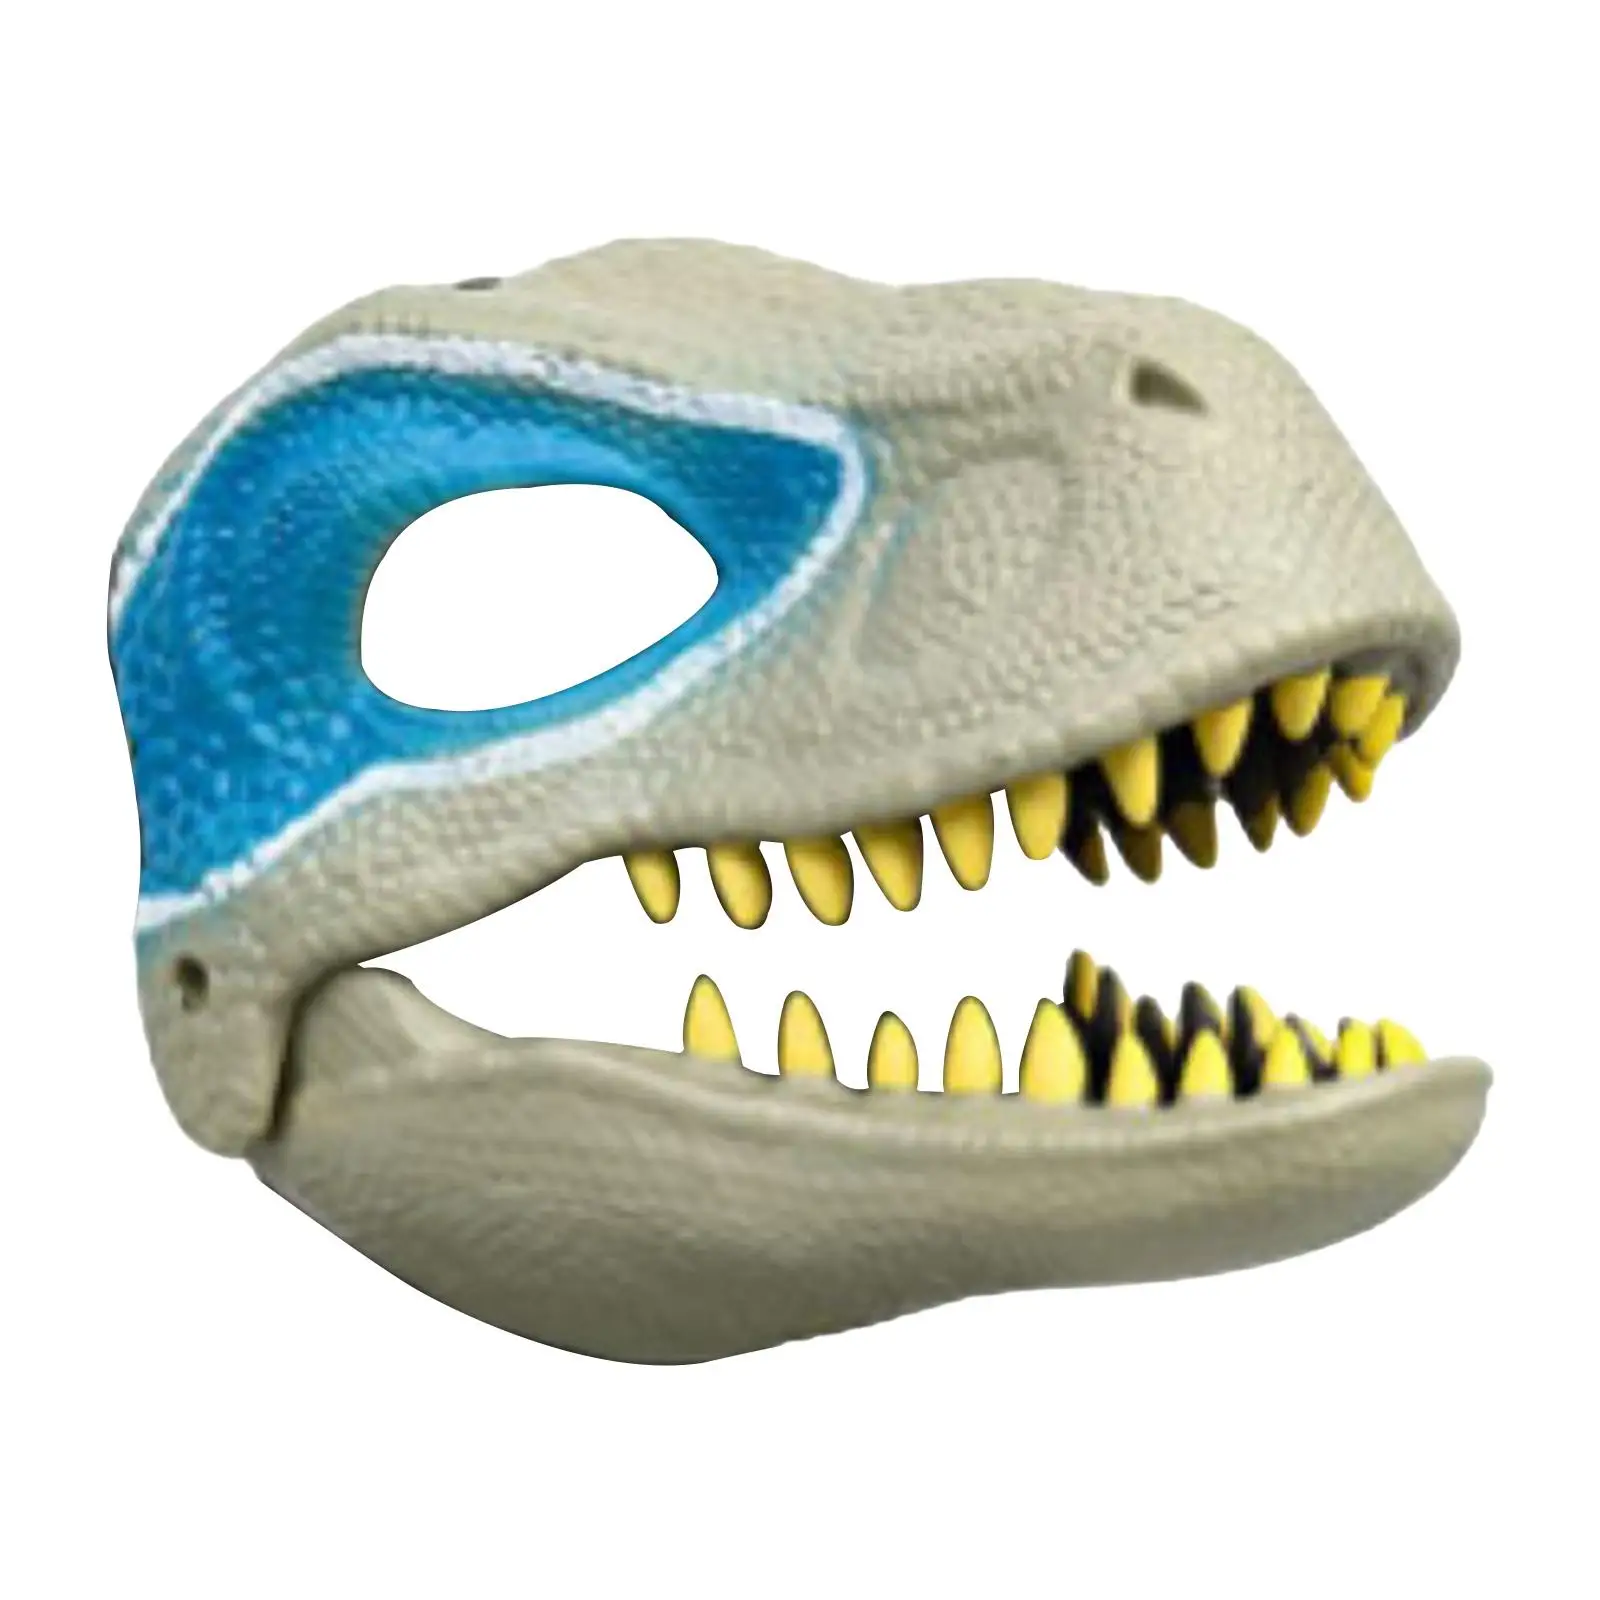 Dinosaur Mask Halloween Costume Novelty Latex Mask Photo Props for Themed Parties Festival Theater Fancy Dress Stage Performance